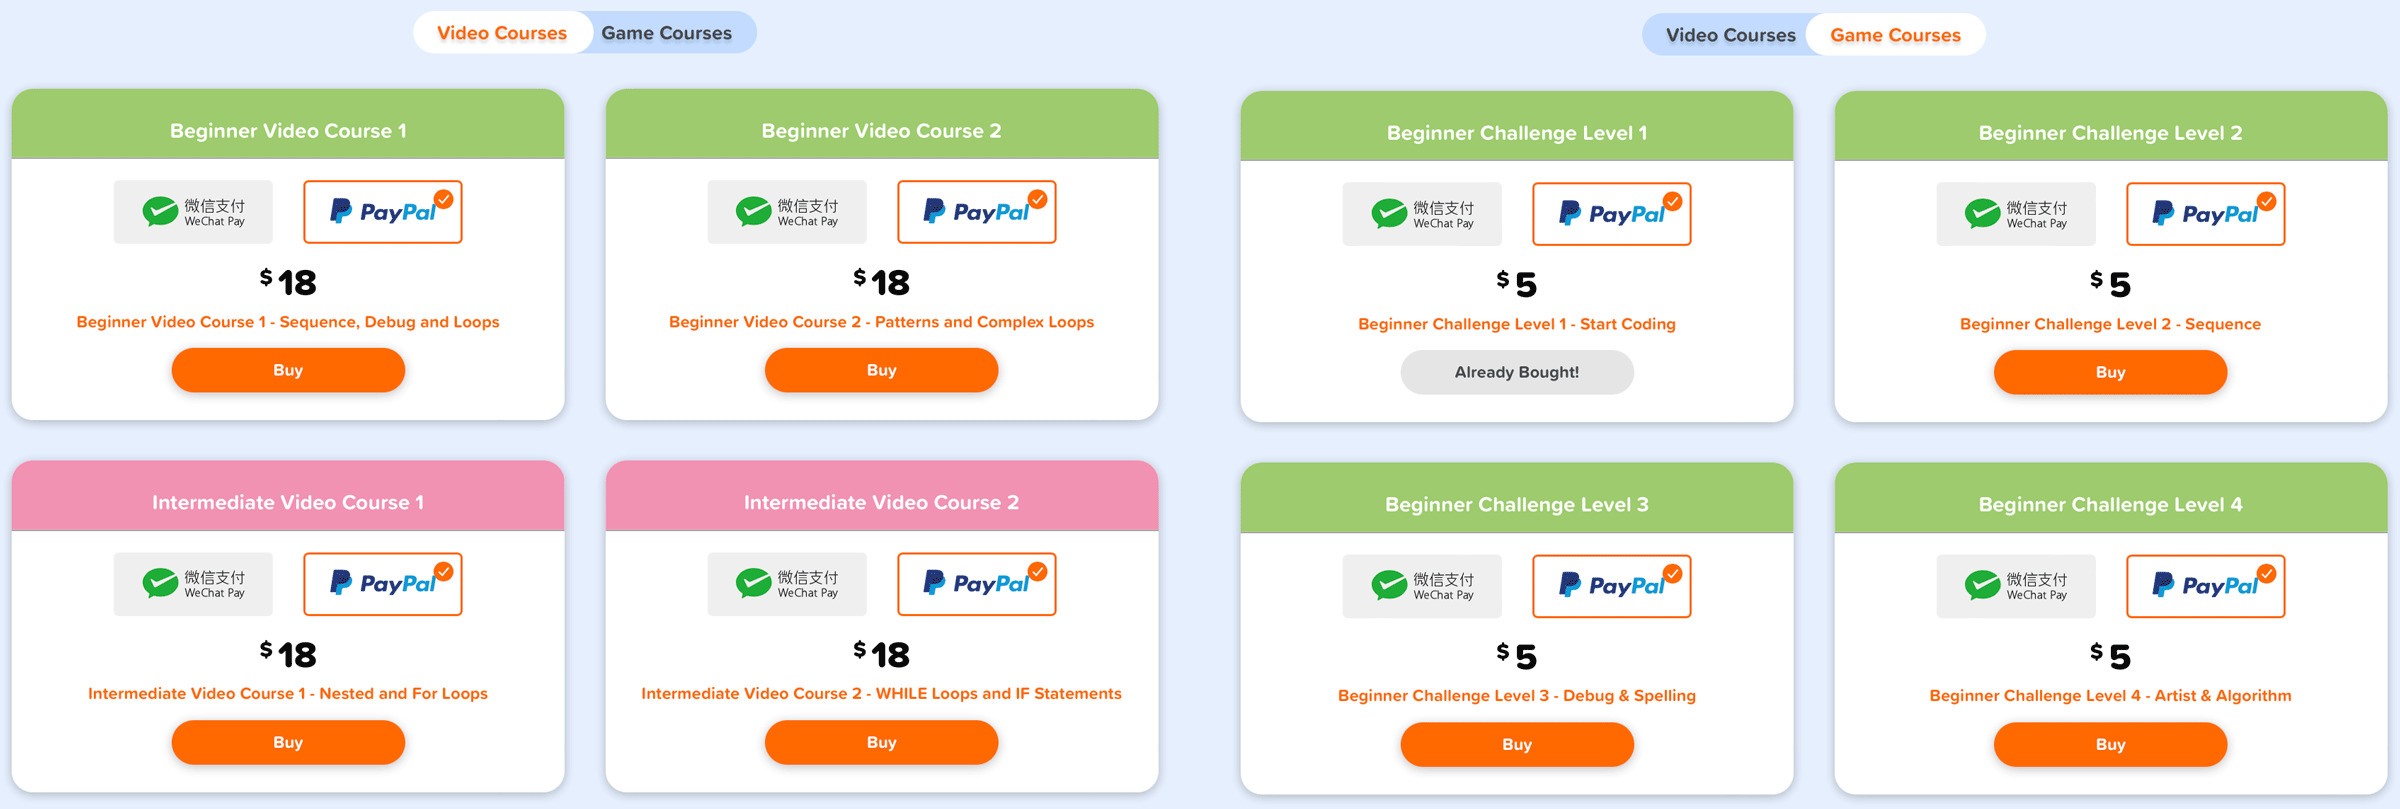 Buy courses page